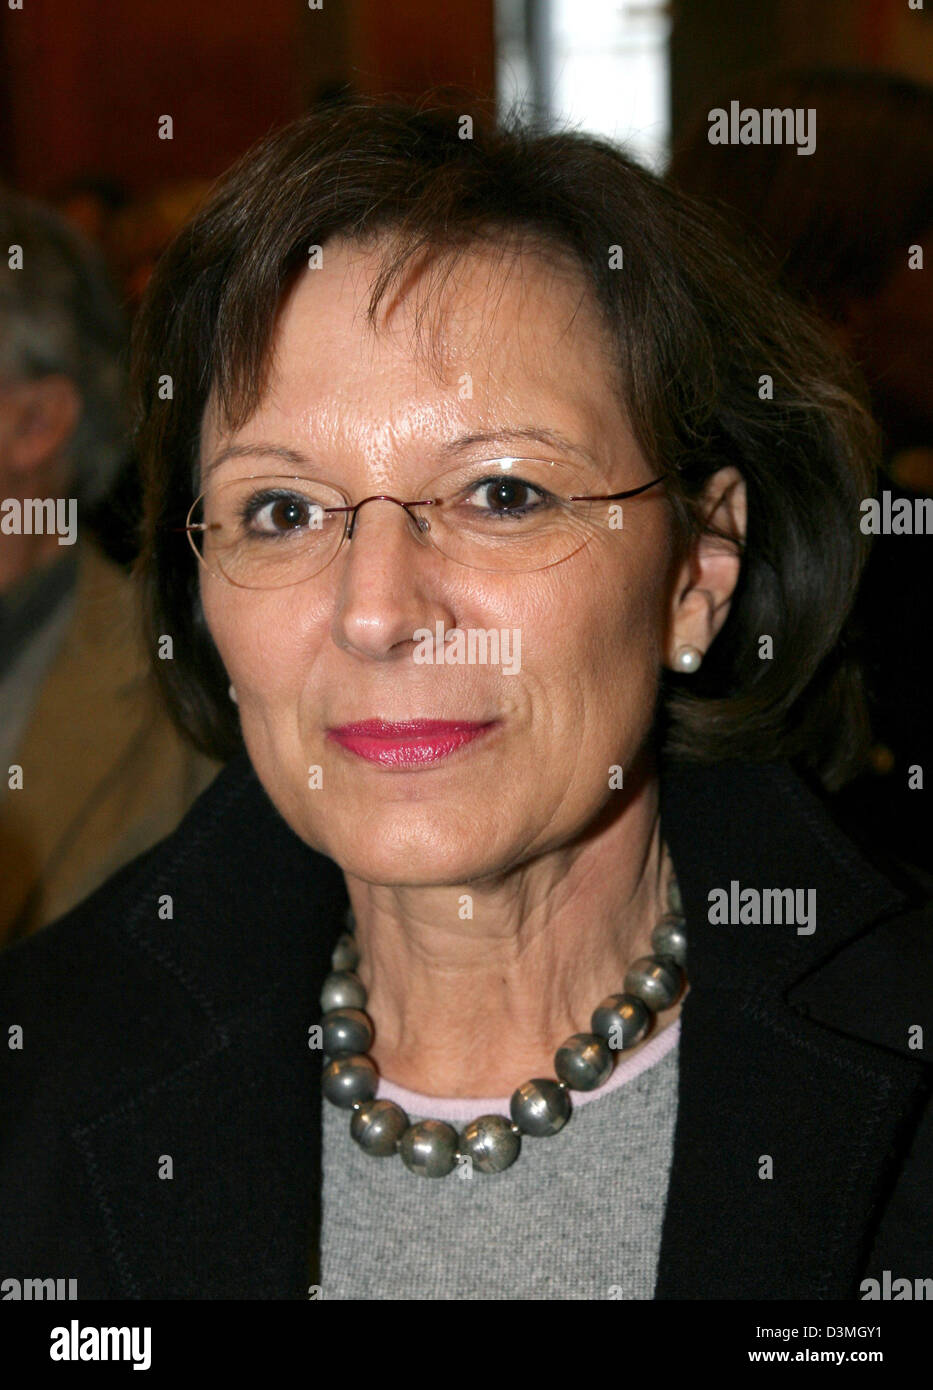 Bavarian Minister for European Affairs and the Federal Council Emilia Mueller smiles during the 'Prix Courage' award ceremony at the 'Woman of the Year 2005' show in Munich, Germany, Tuesday, 14 March 2006. Photo: Ursula Dueren Stock Photo